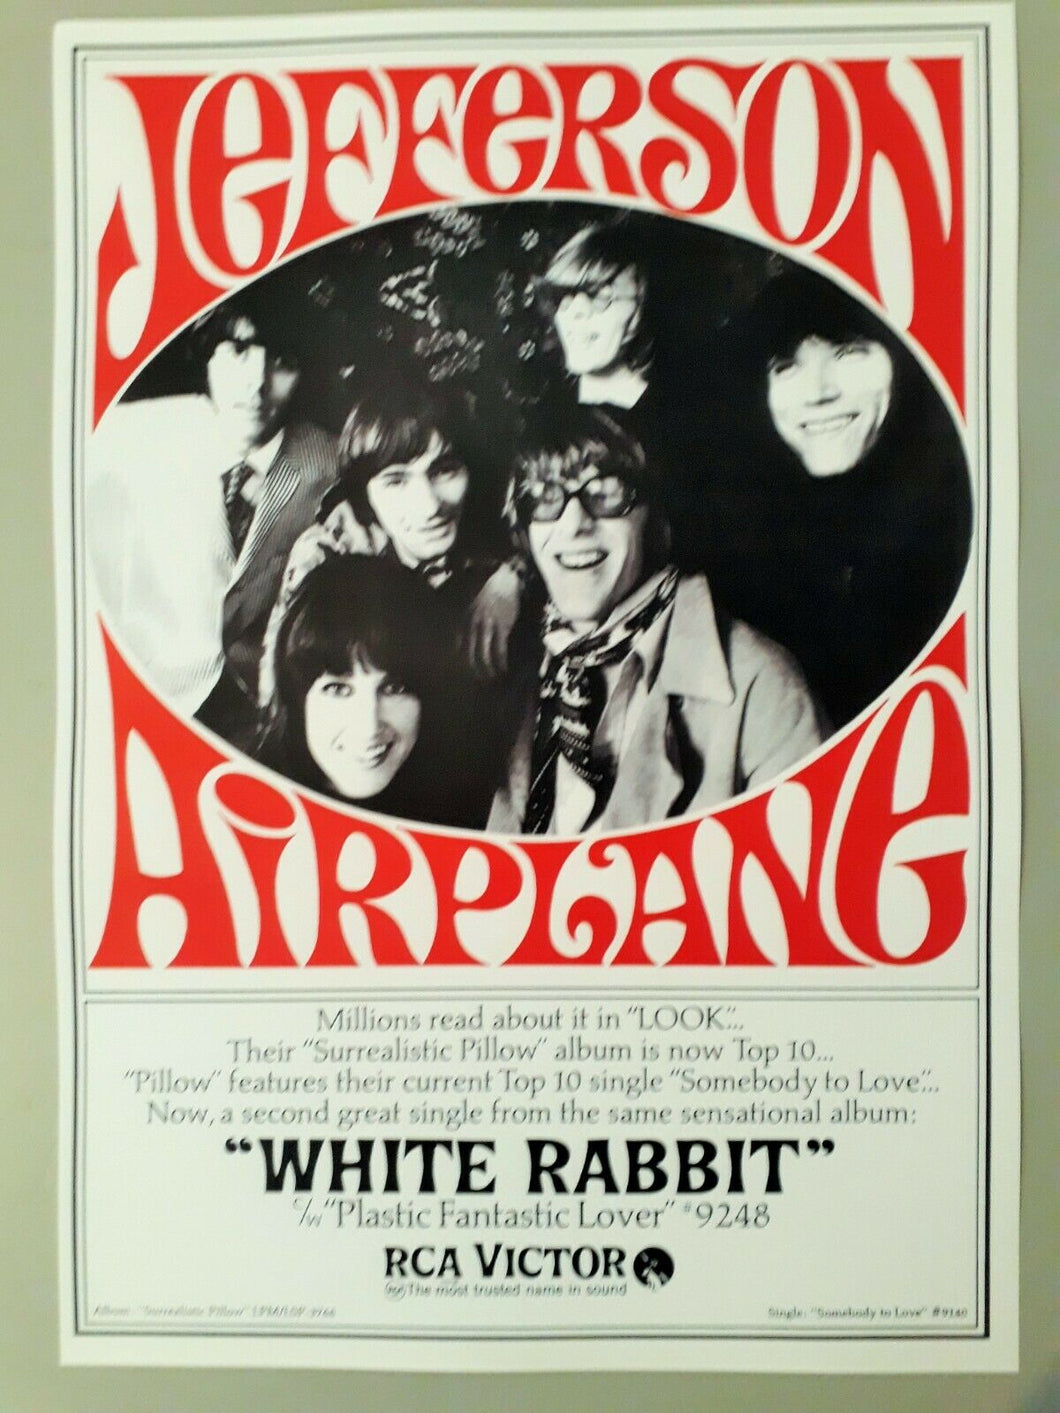 Jefferson Airplane promo poster - White Rabbit Advert 1966 new reprinted edition - Original Music and Movie Posters for sale from Bamalama - Online Poster Store UK London